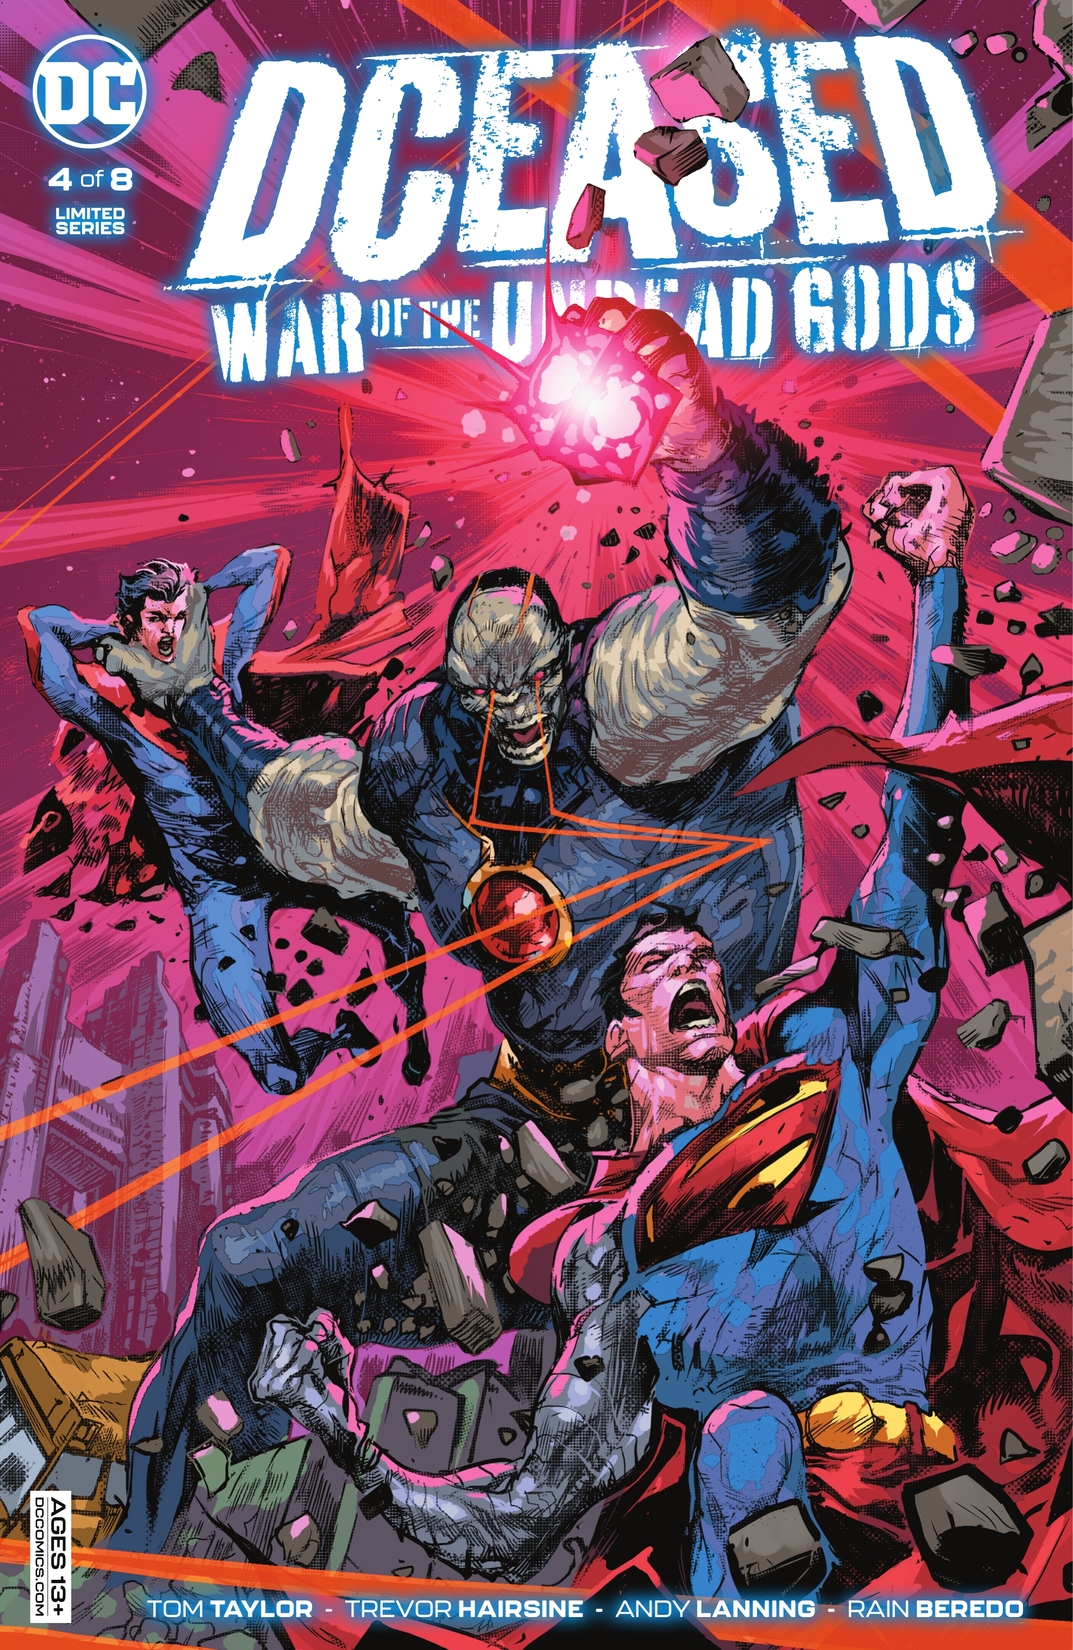 DCeased: War of the Undead Gods #4 preview images